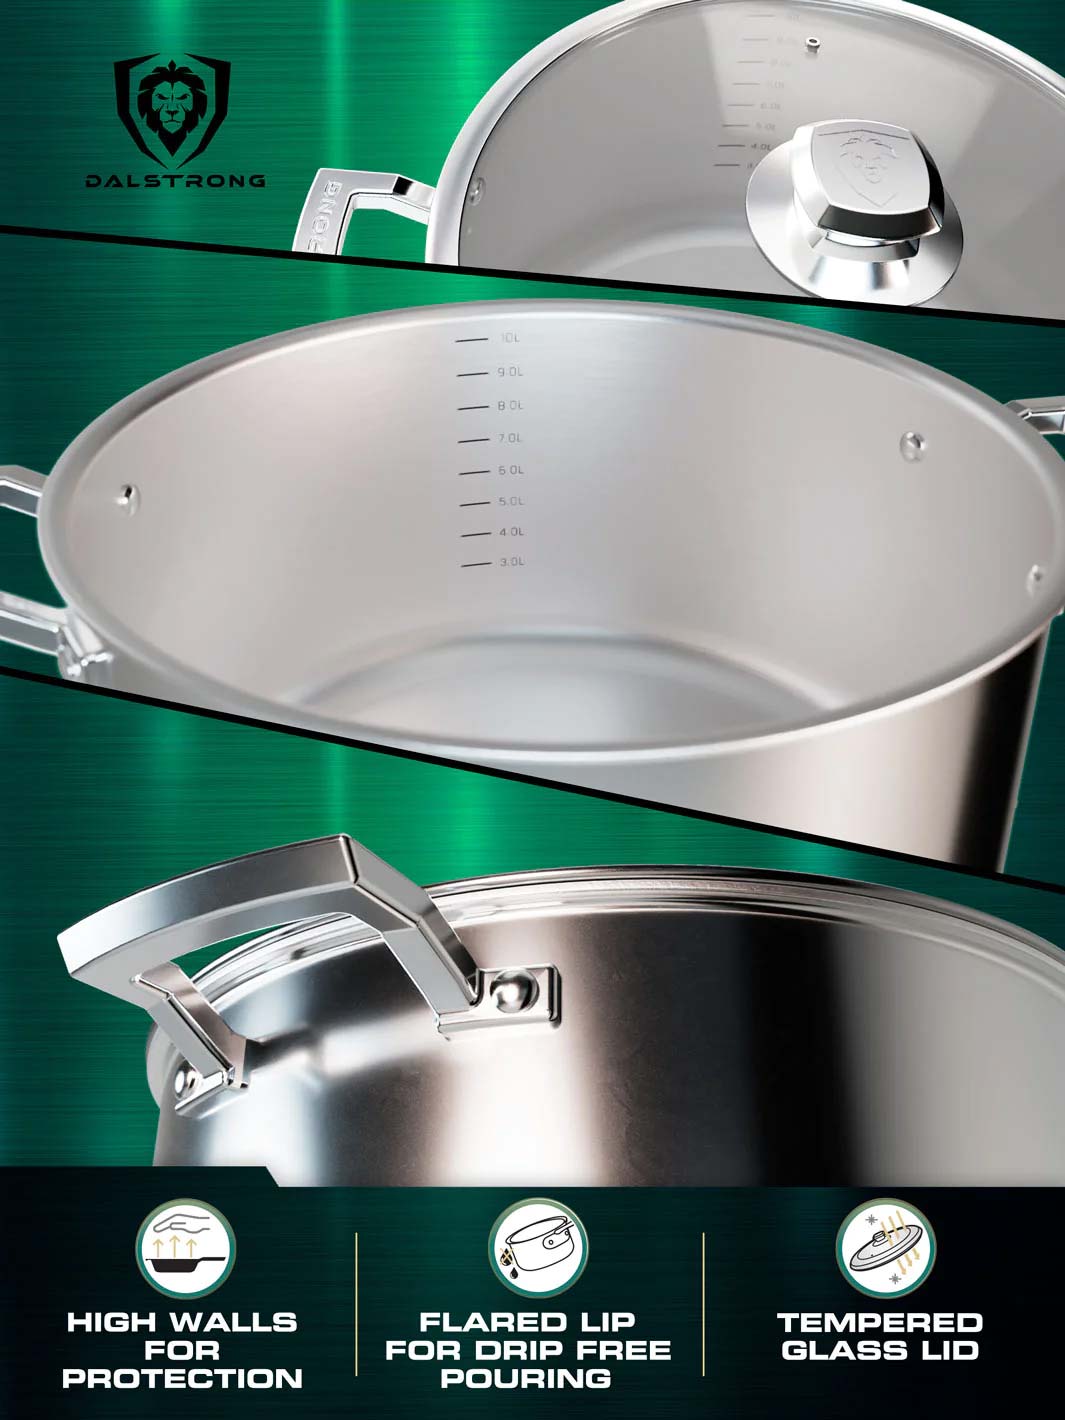 Dalstrong oberon series 12 quart stock pot silver featuring it's high walls and tempered glass lid.